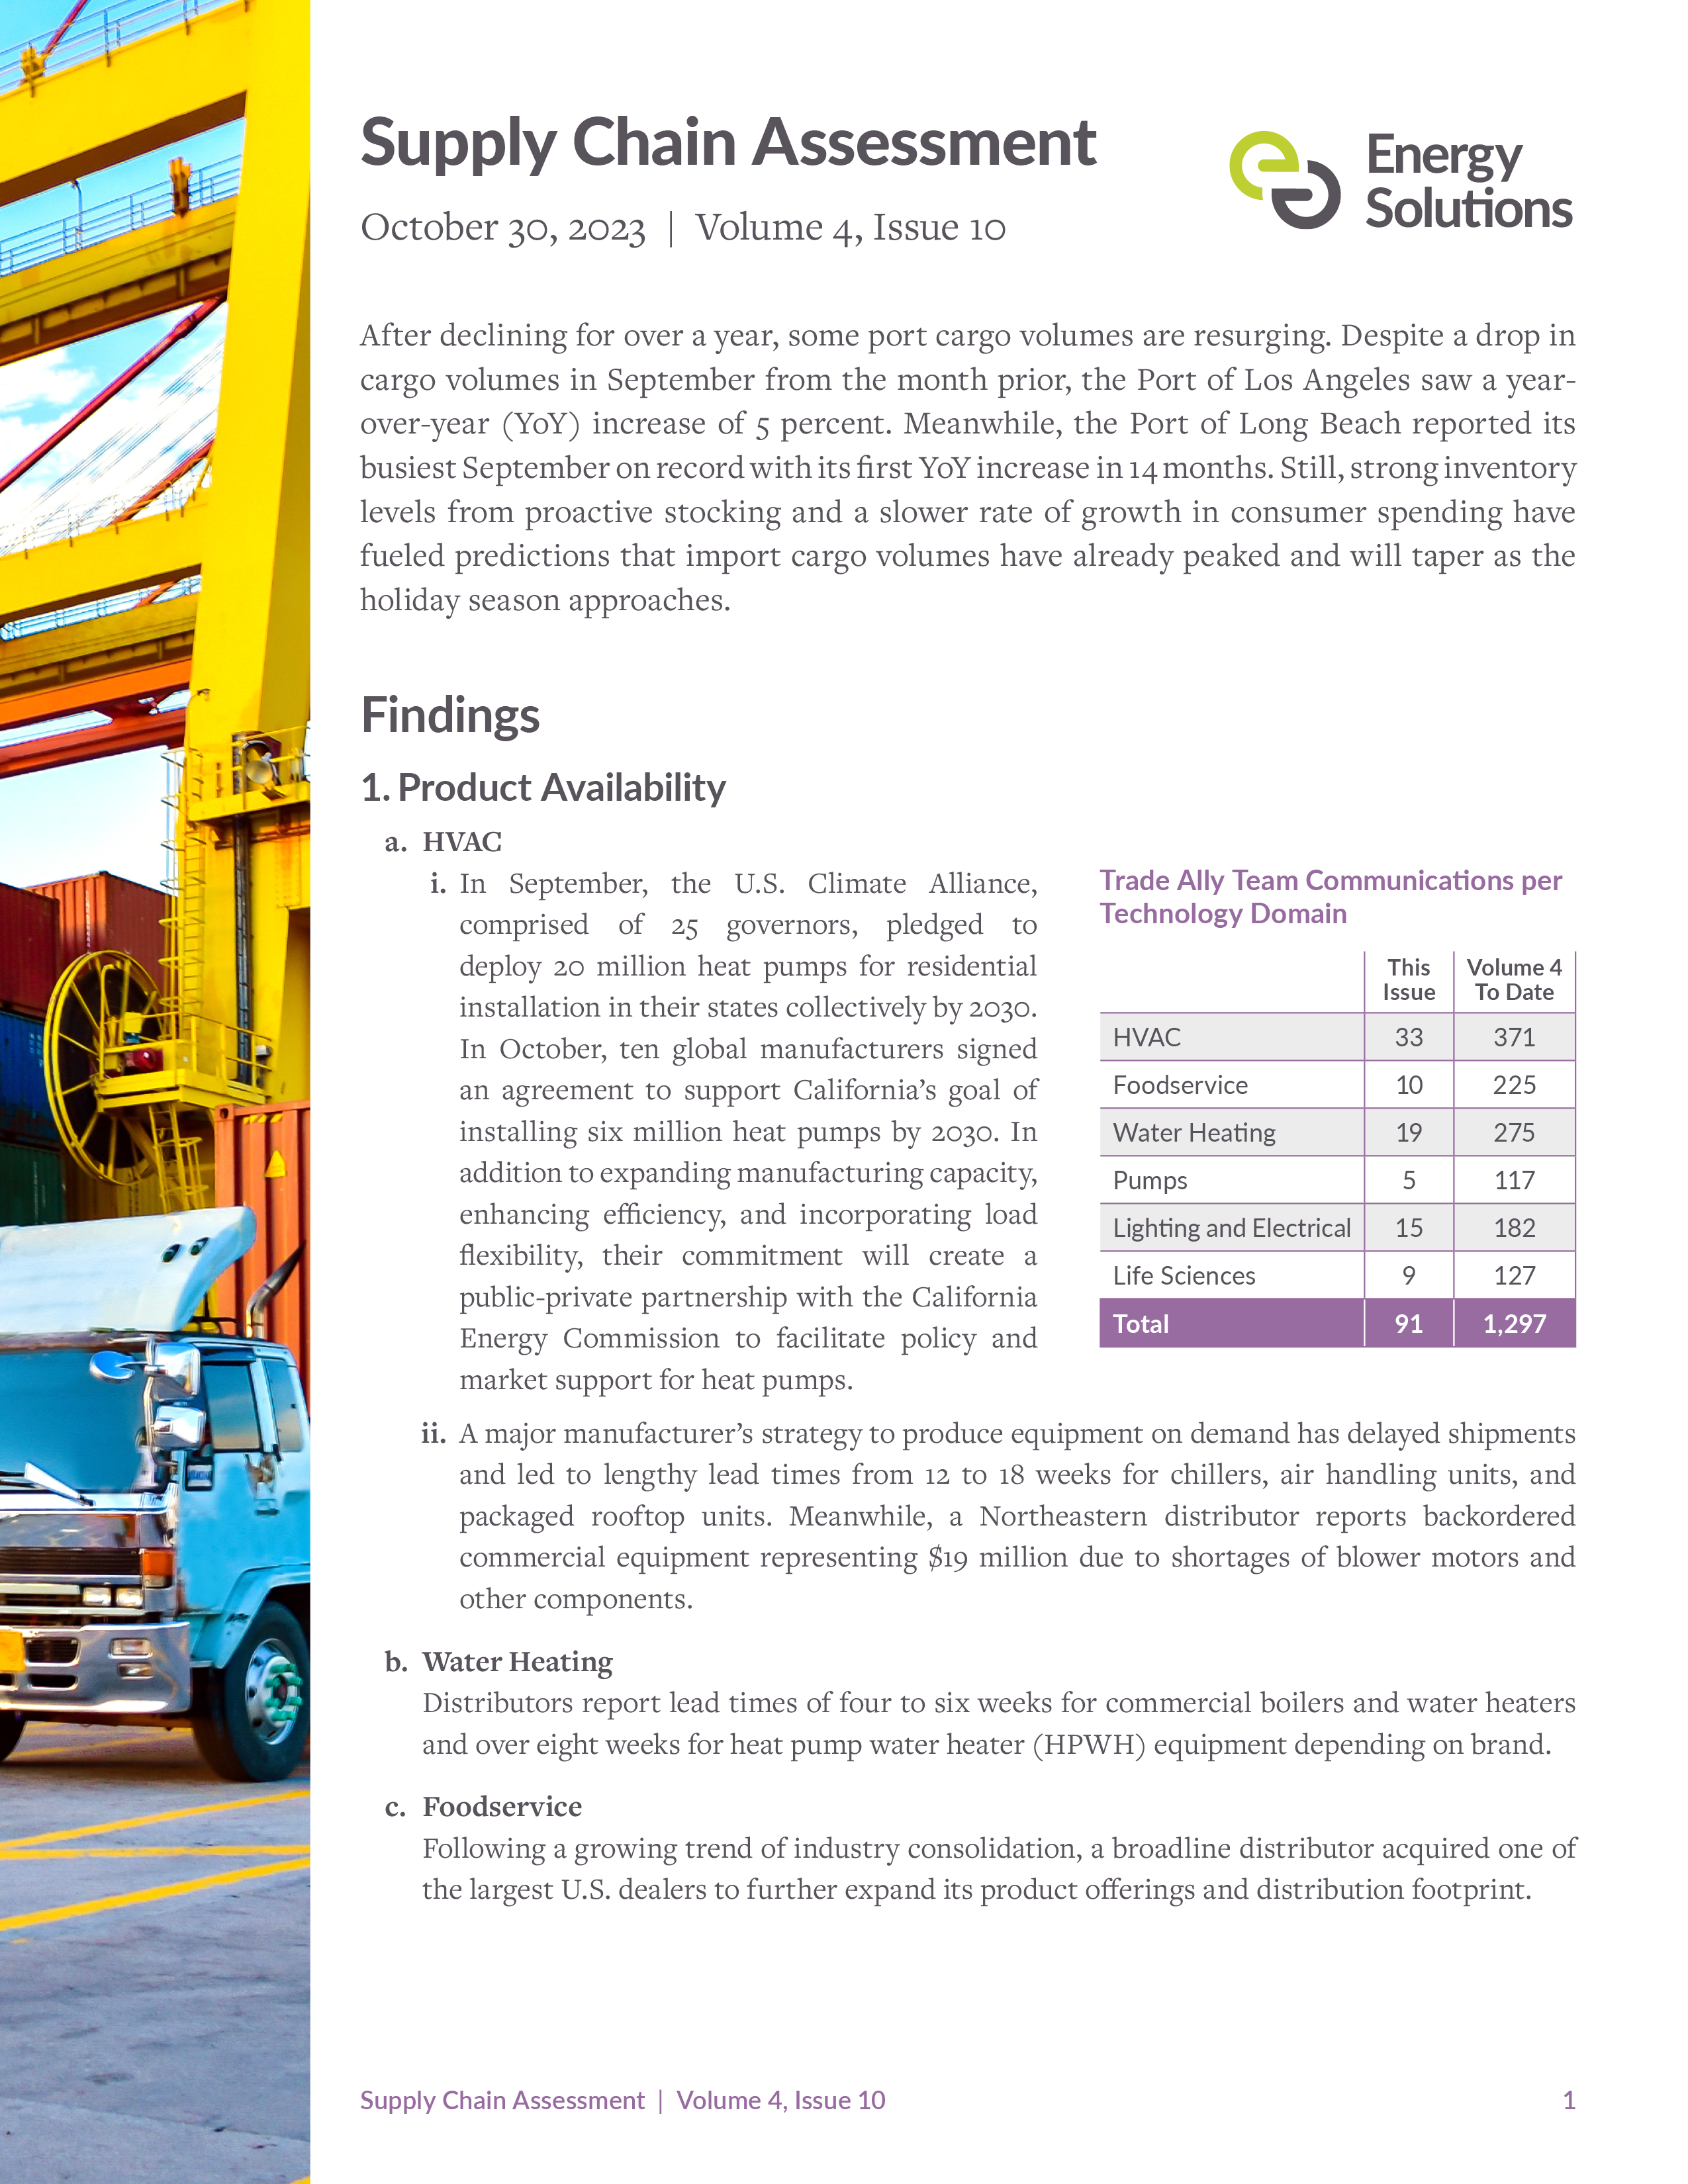 Supply Chain Assessment Vol 3 Issue 10